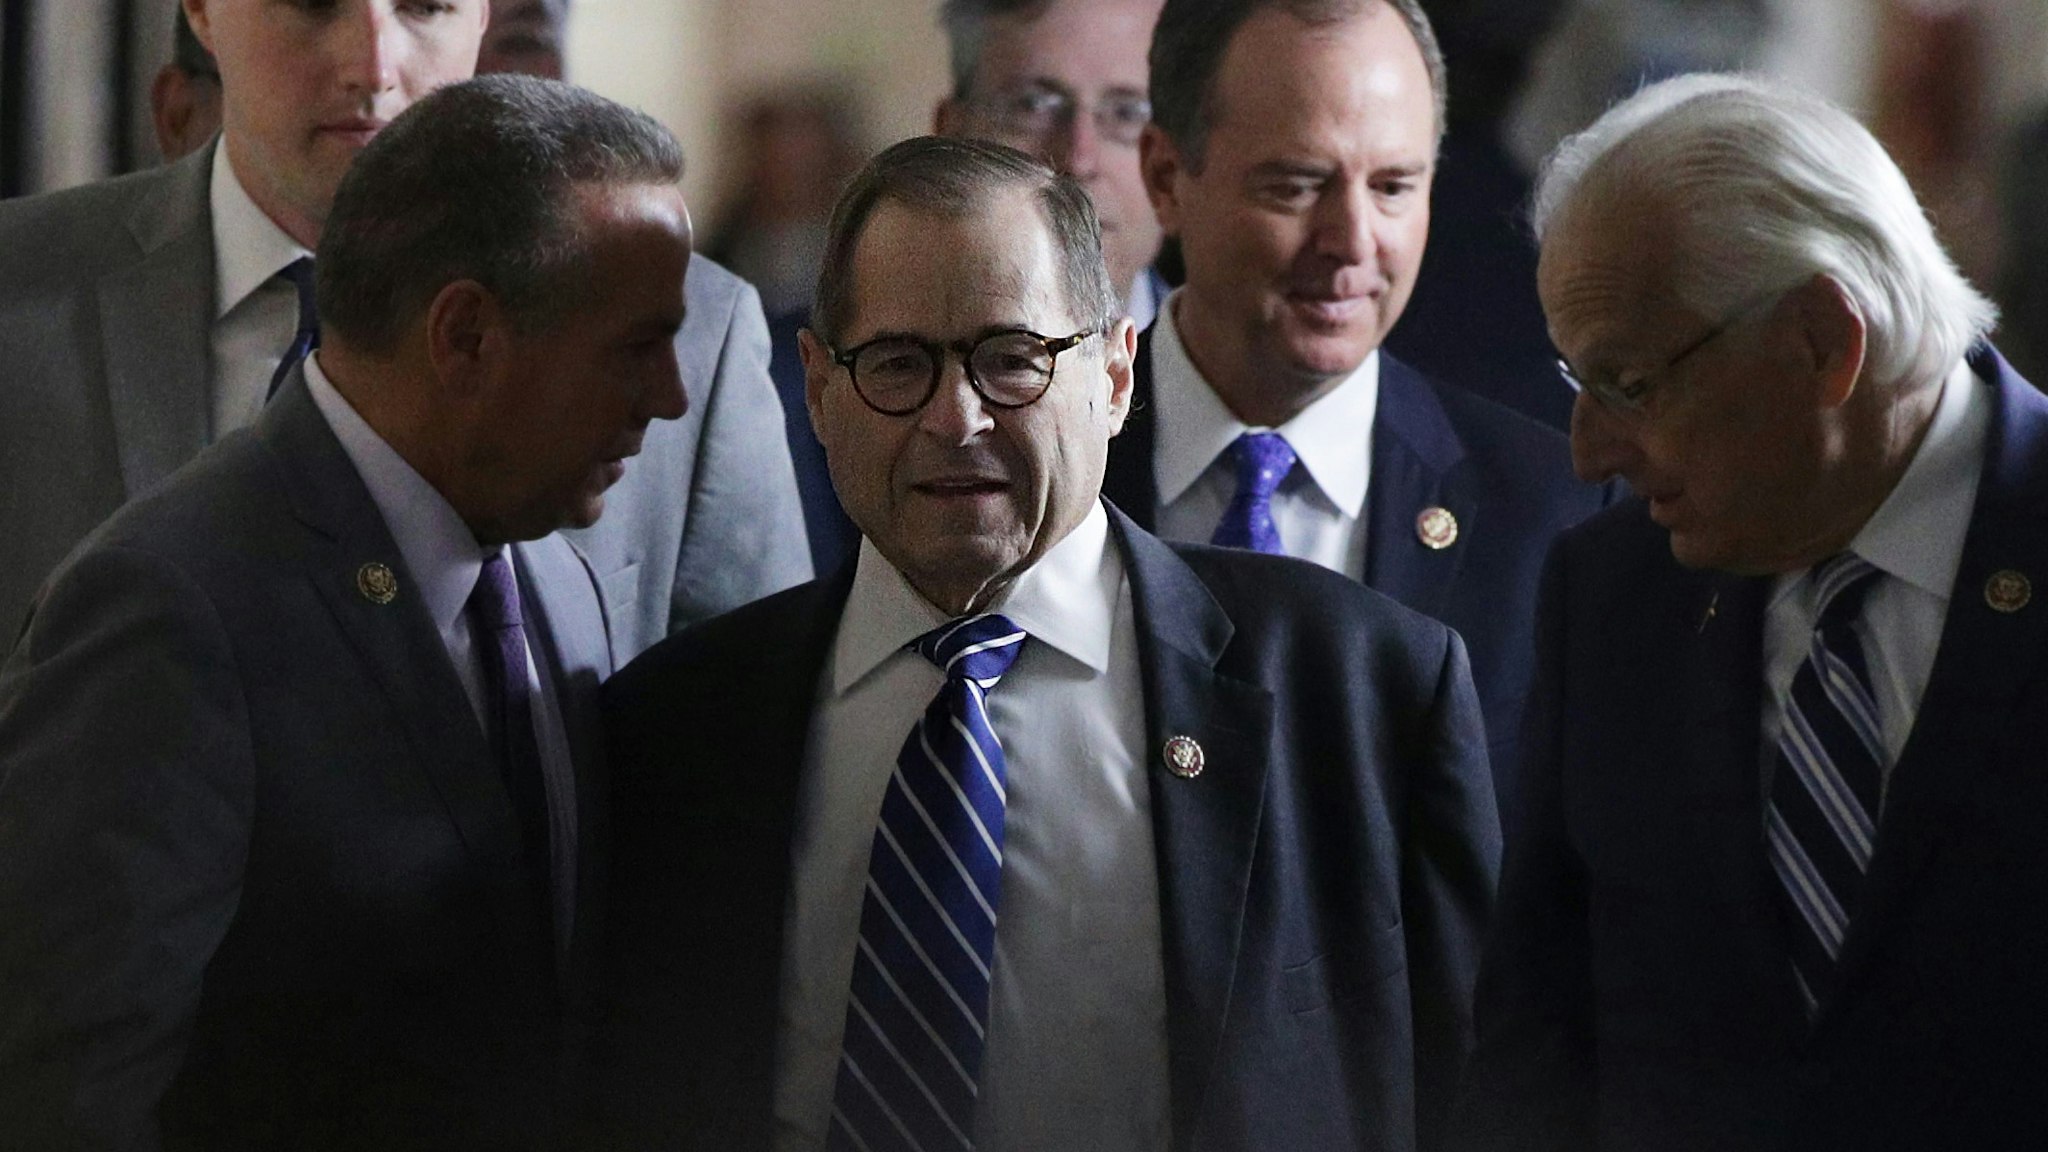 WASHINGTON, DC - SEPTEMBER 25: U.S. Rep. Jerry Nadler (D-NY), chairman of House Judiciary Committee, arrives with Rep. Bill Pascrell (D-NJ), Rep. David Cicilline (D-RI) and Rep. Adam Schiff (D-CA), chairman of House Intelligence Committee, at a House Democratic Caucus meeting at the U.S. Capitol September 25, 2019 in Washington, DC. House Democrats met to discuss their agenda one day after Speaker of the House Rep. Nancy Pelosi has announced a formal impeachment inquiry into President Donald Trump. (Photo by Alex Wong/Getty Images)